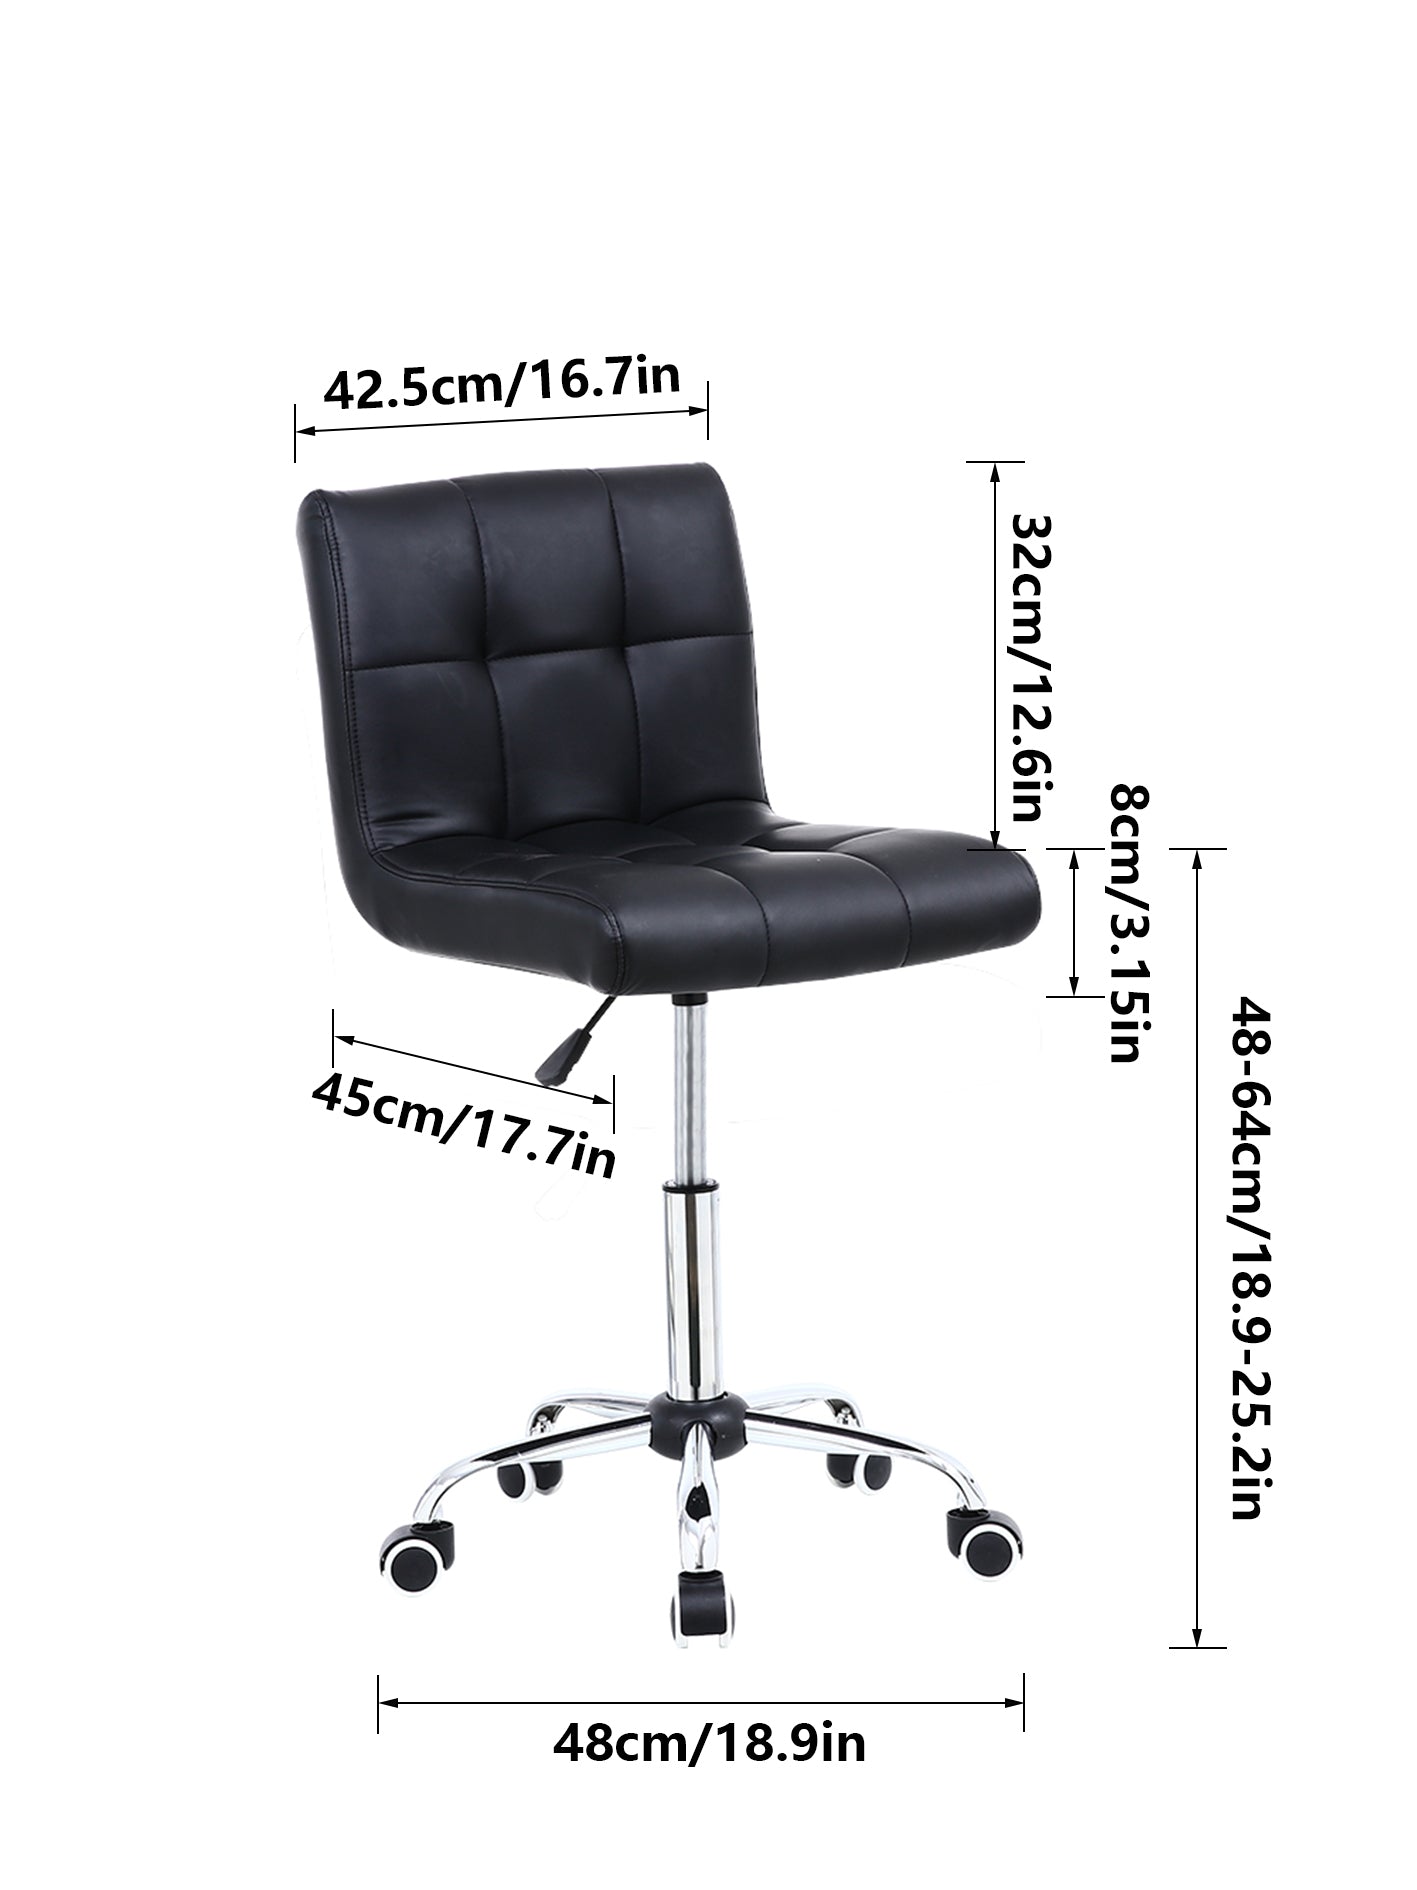 KKTONER Modern Office Chair Square PU Leather Height Adjustable Swivel Desk Chair with Backrest Black